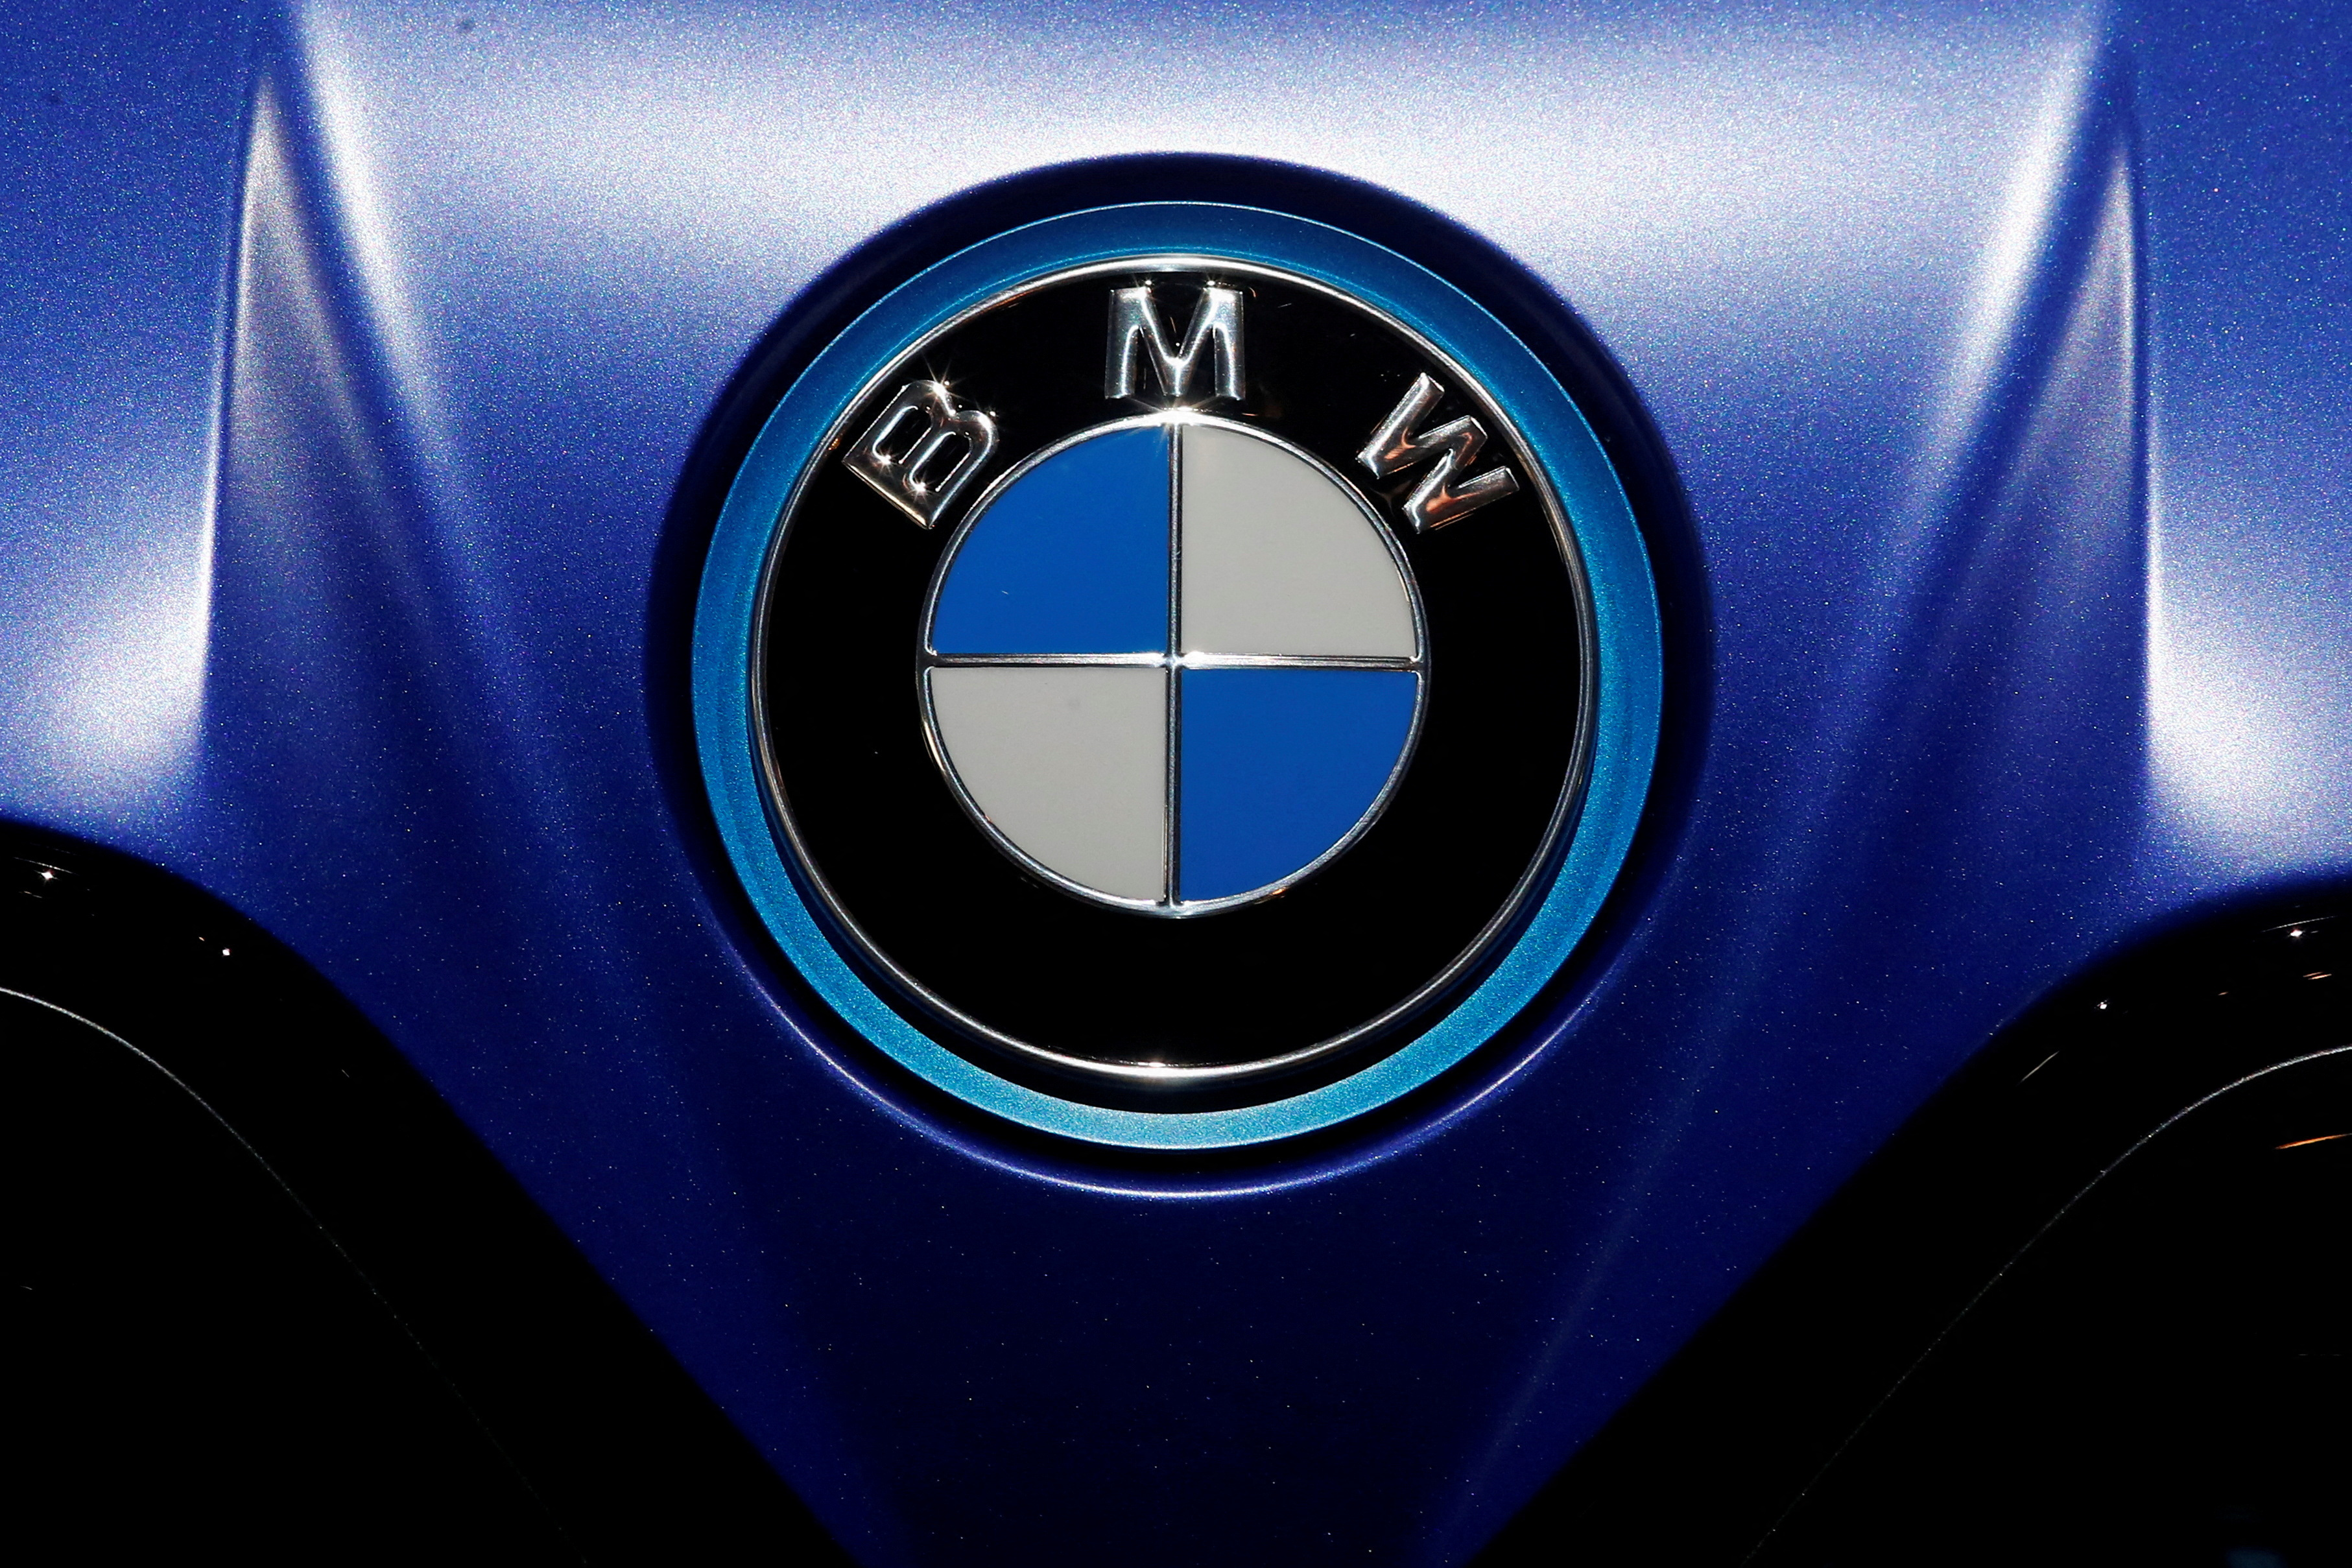 BMW says in 2023, 'The clear focus will be on continuing to ramp up electromobility.' /Wolfgang Rattay/Reuters